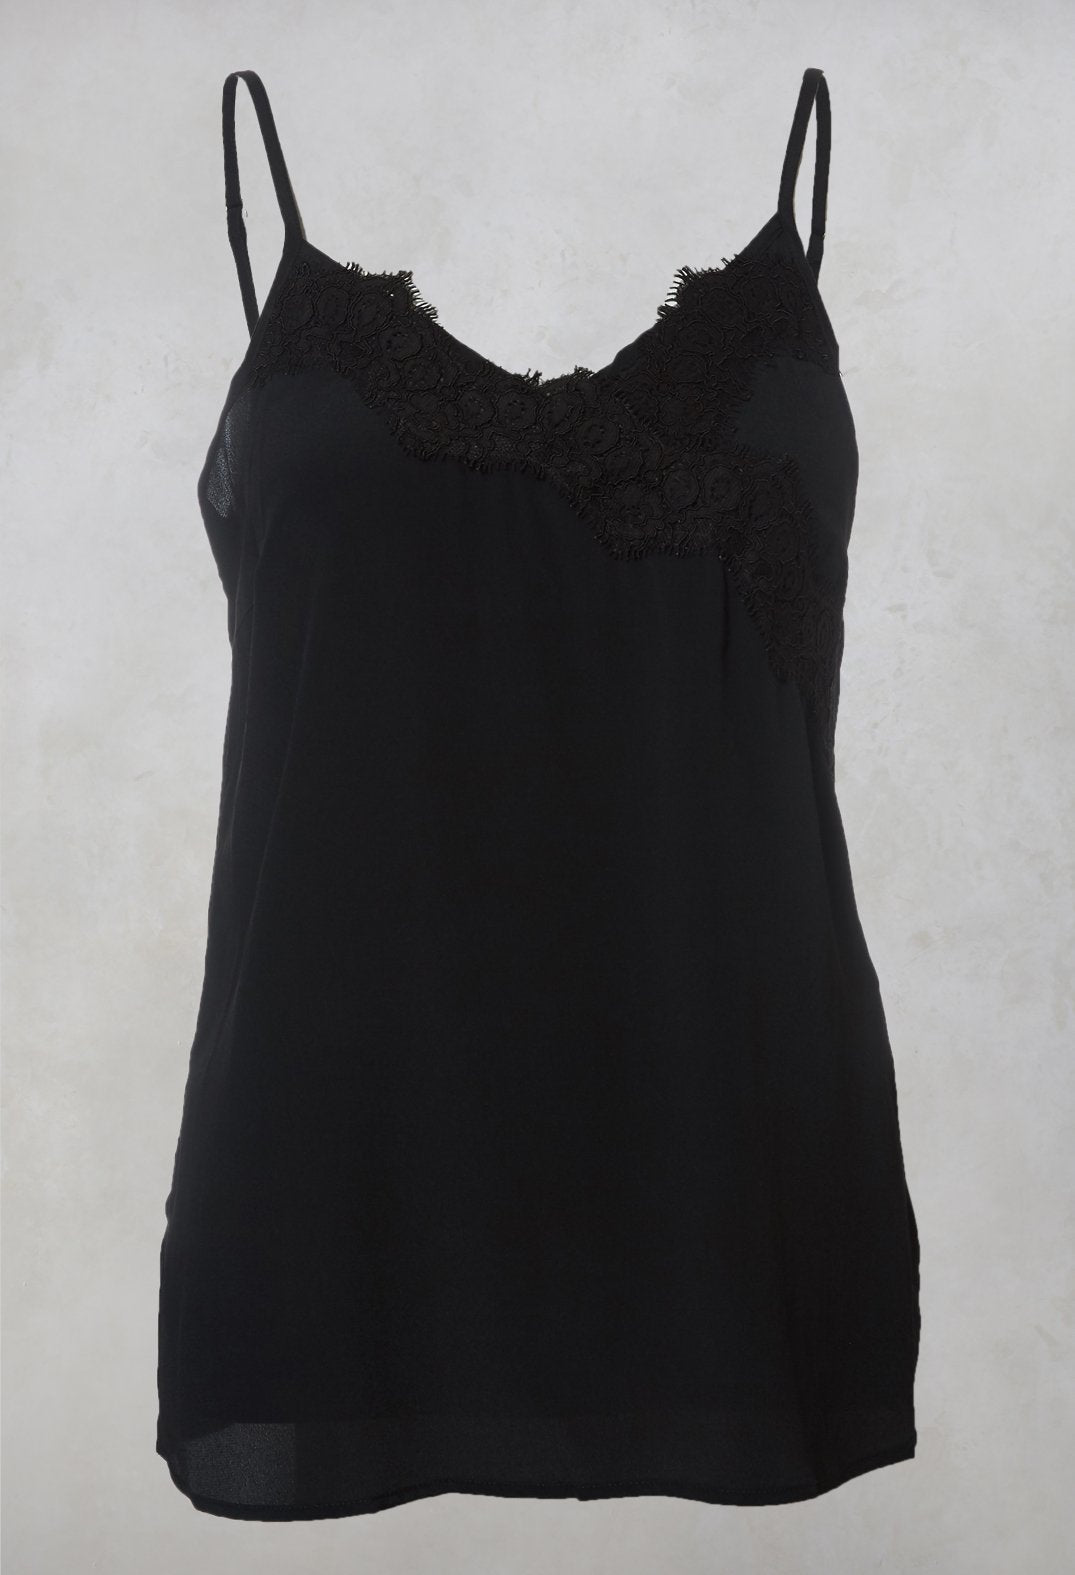 black cami top with lace detail